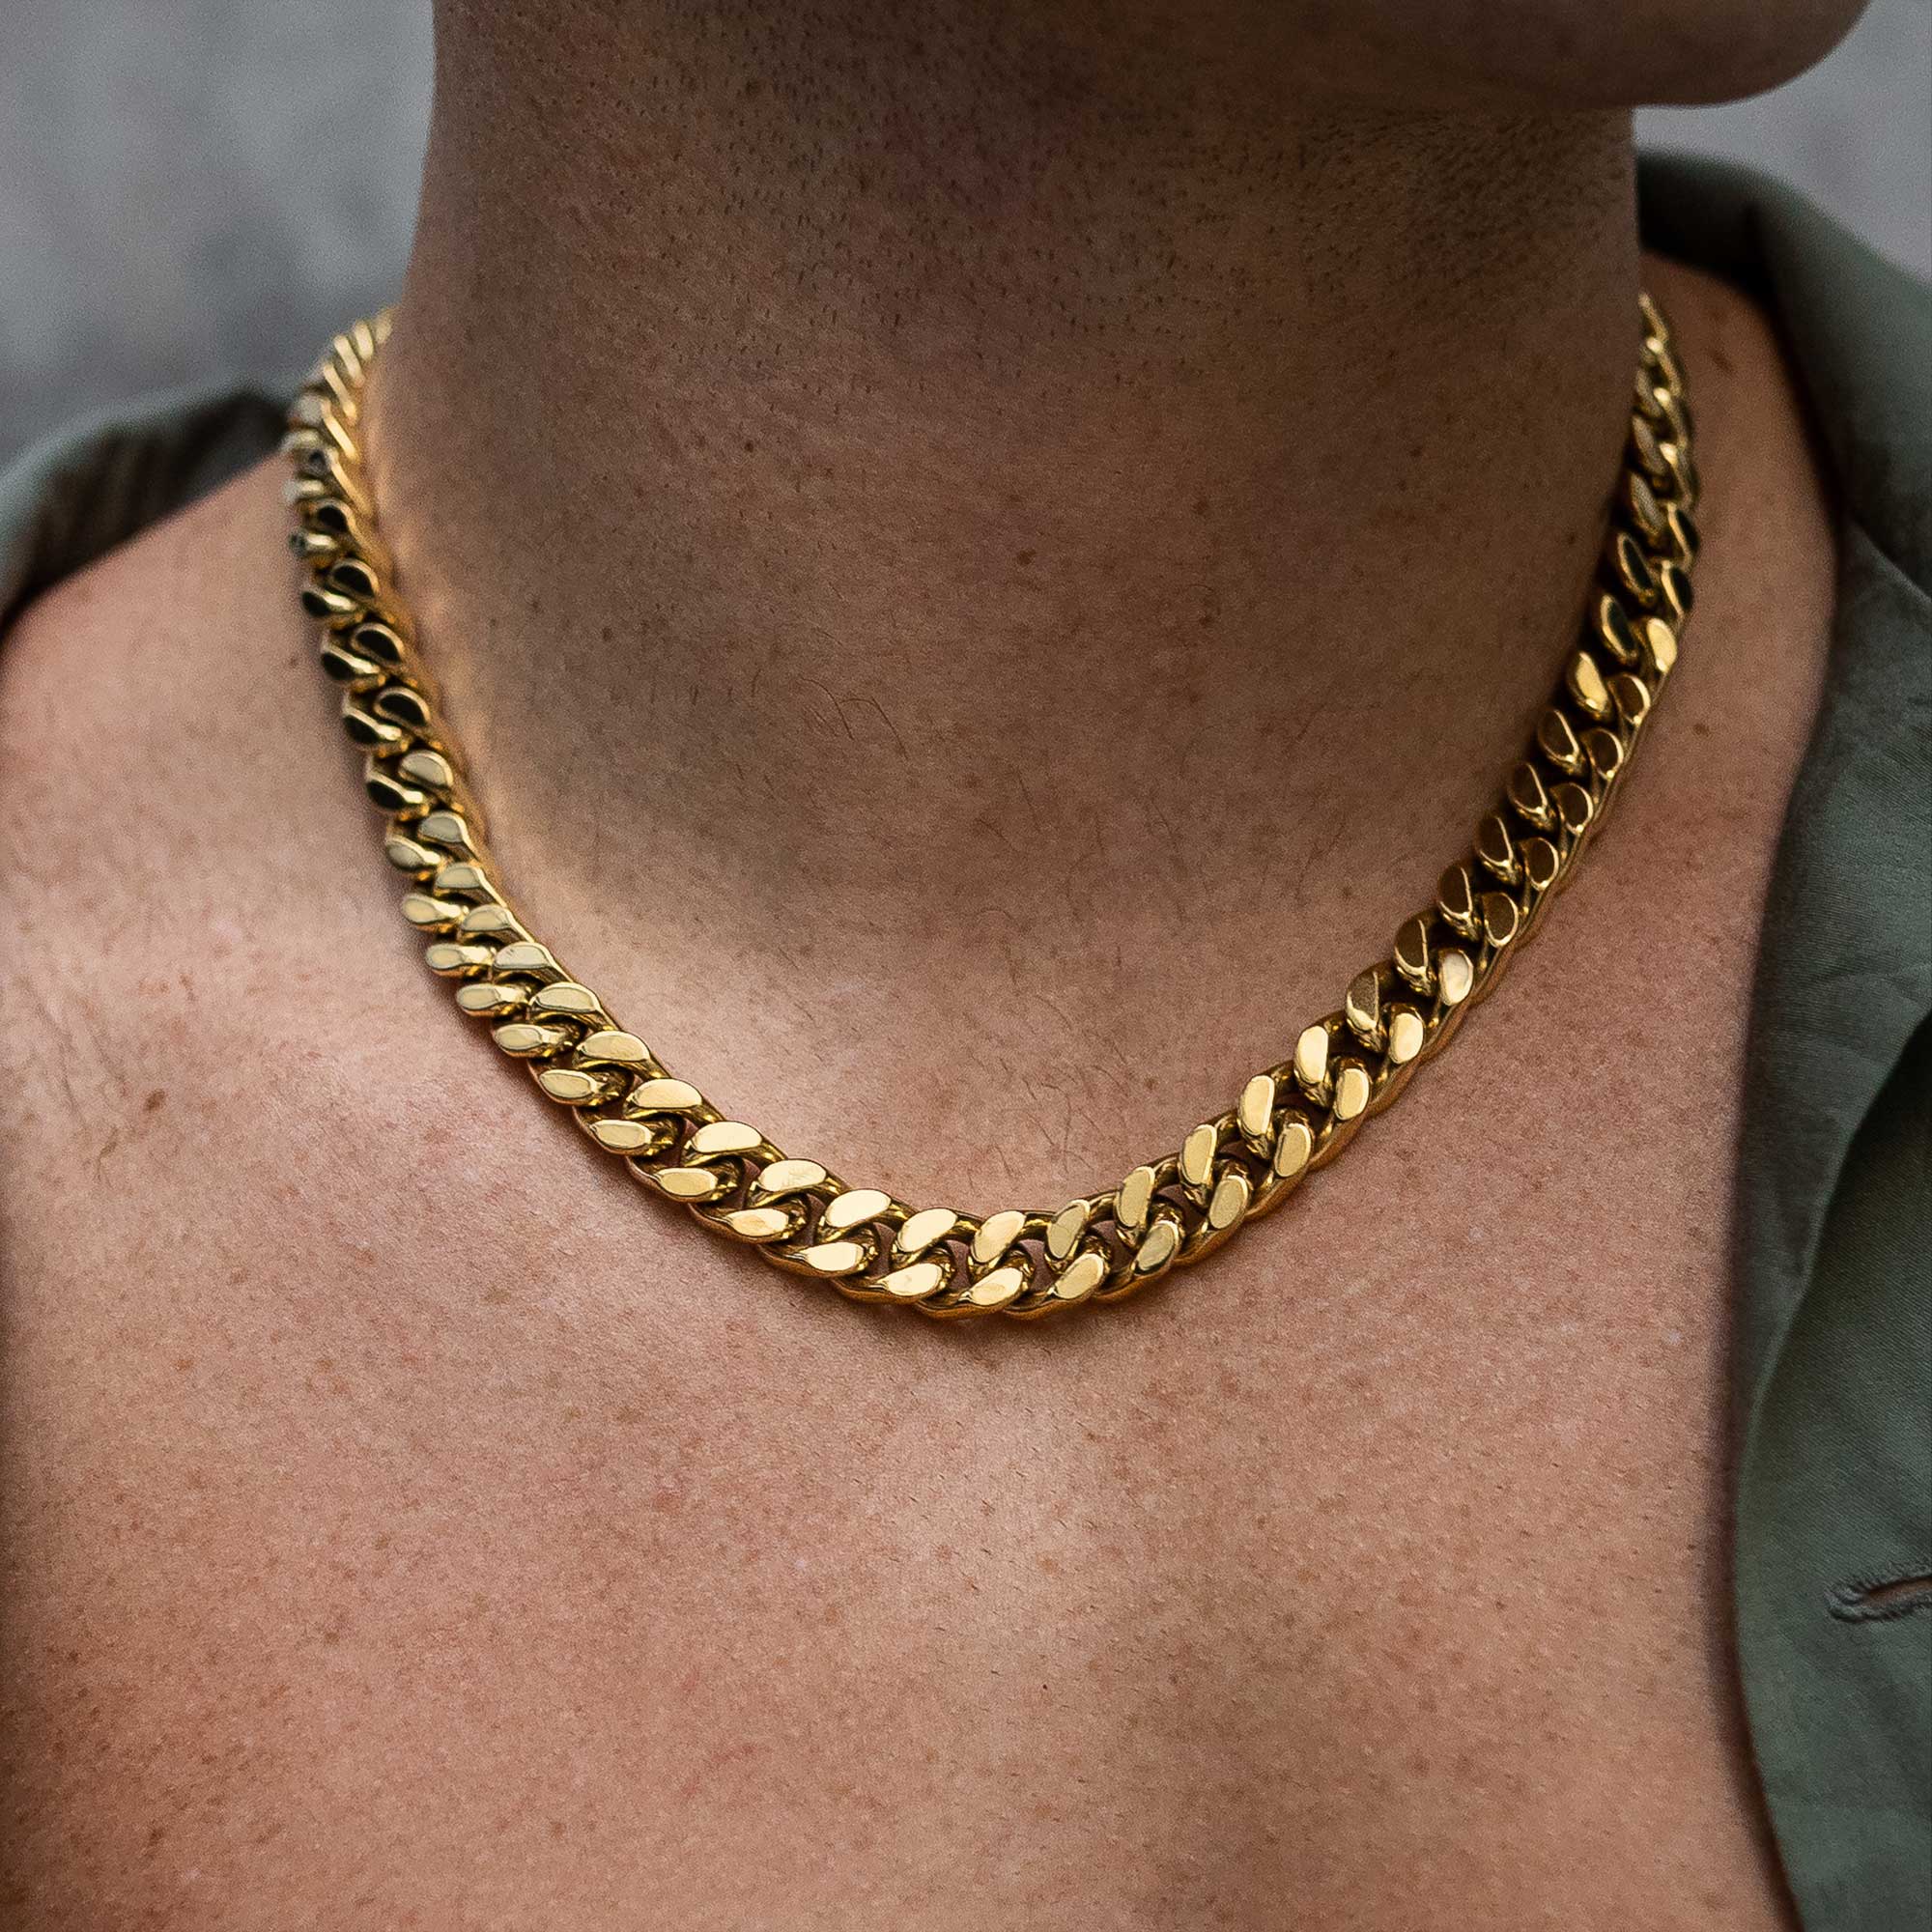 Gold Cuban Link Chains collection by Statement Collective